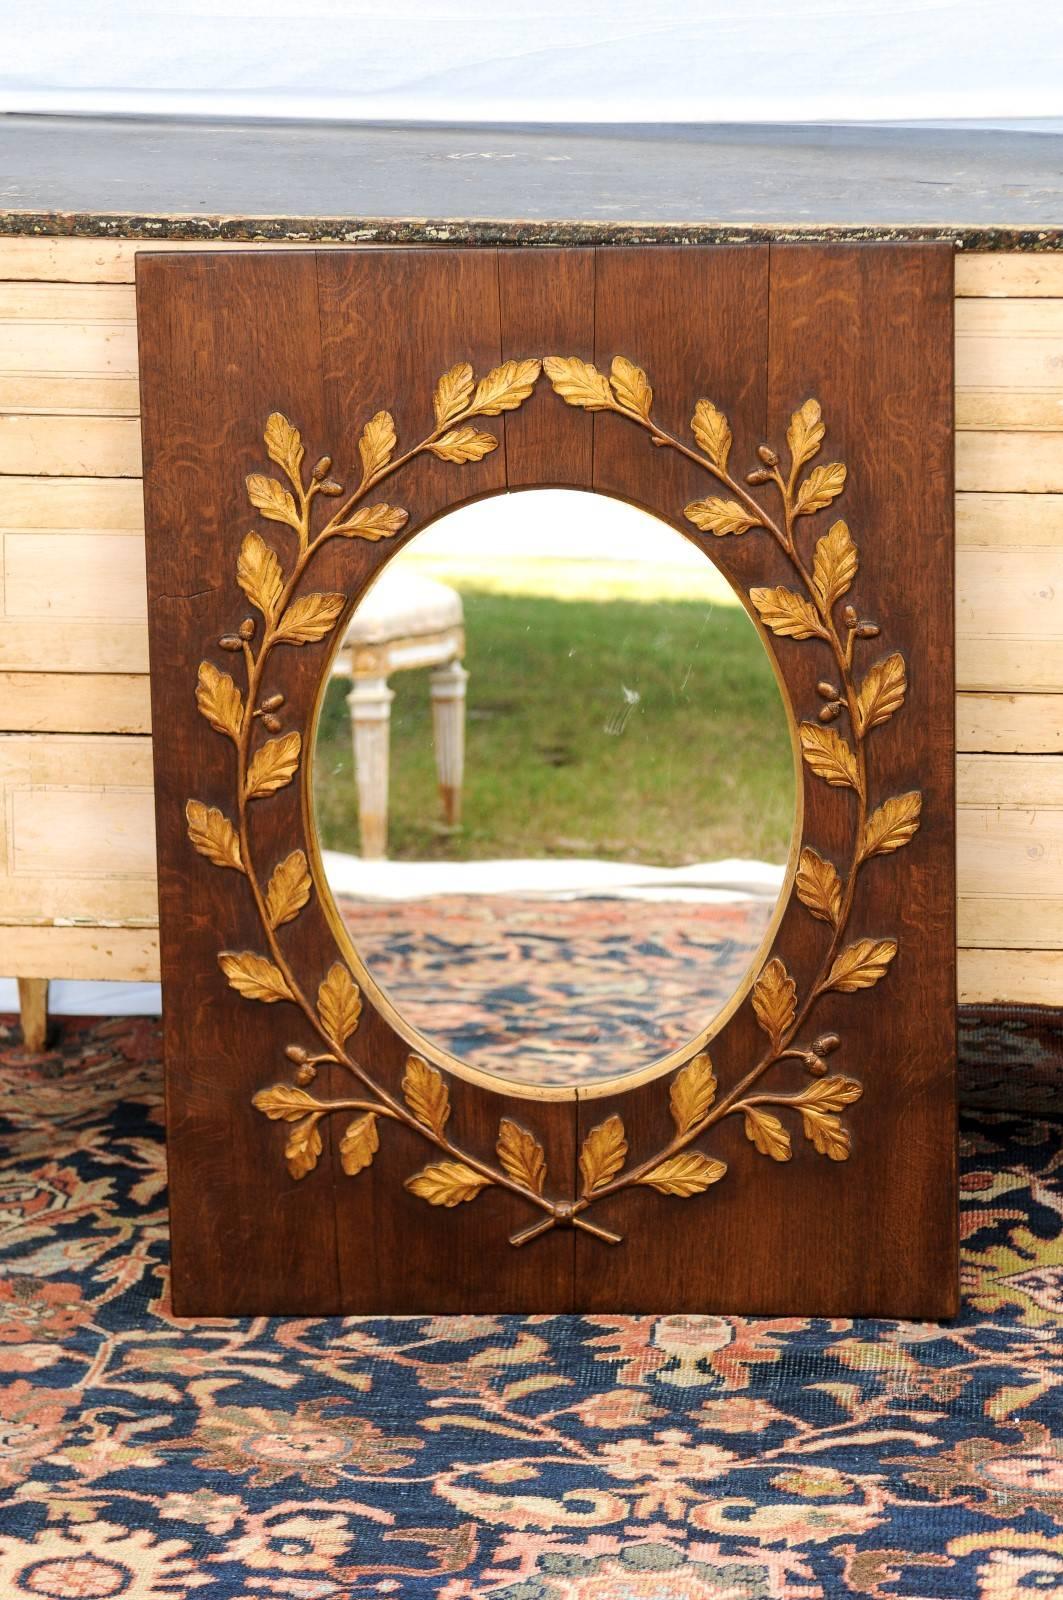 This exquisite English vertical mirror from the late 19th century features a simple rectangular frame with clear oval mirror in its centre. The eye is immediately attracted to the contrast between this simple layout and the exquisite gilded wreath